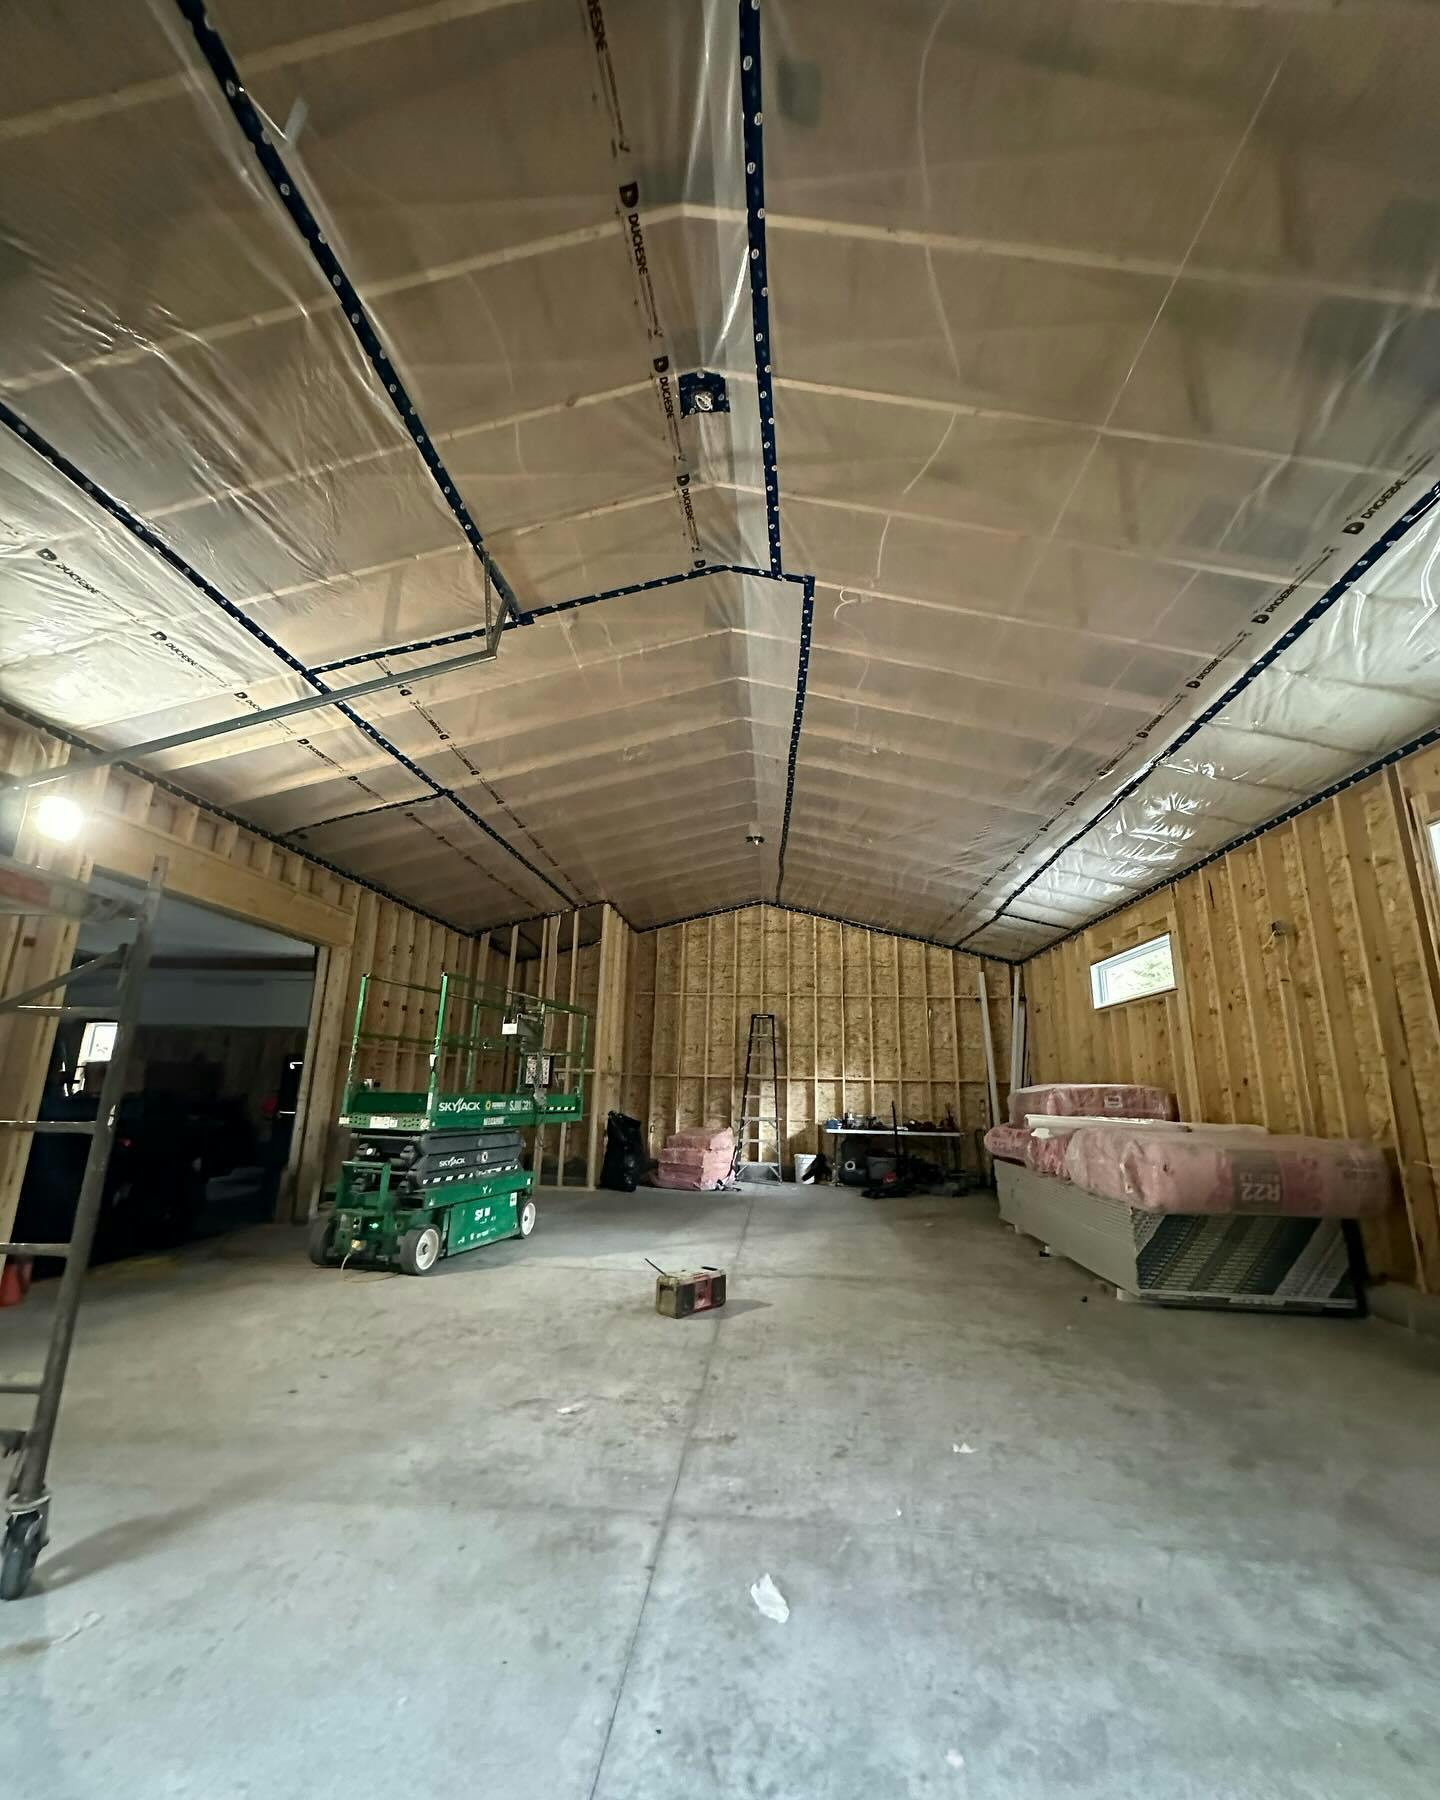 Nice Friday afternoon job! Attic vented and ceiling vapour barrier!  Customer will strap the ceiling this weekend, we will return Tuesday to blow R60 to the attic area and install batt and poly to the walls. That’s a wrap on this week! Have a great weekend!